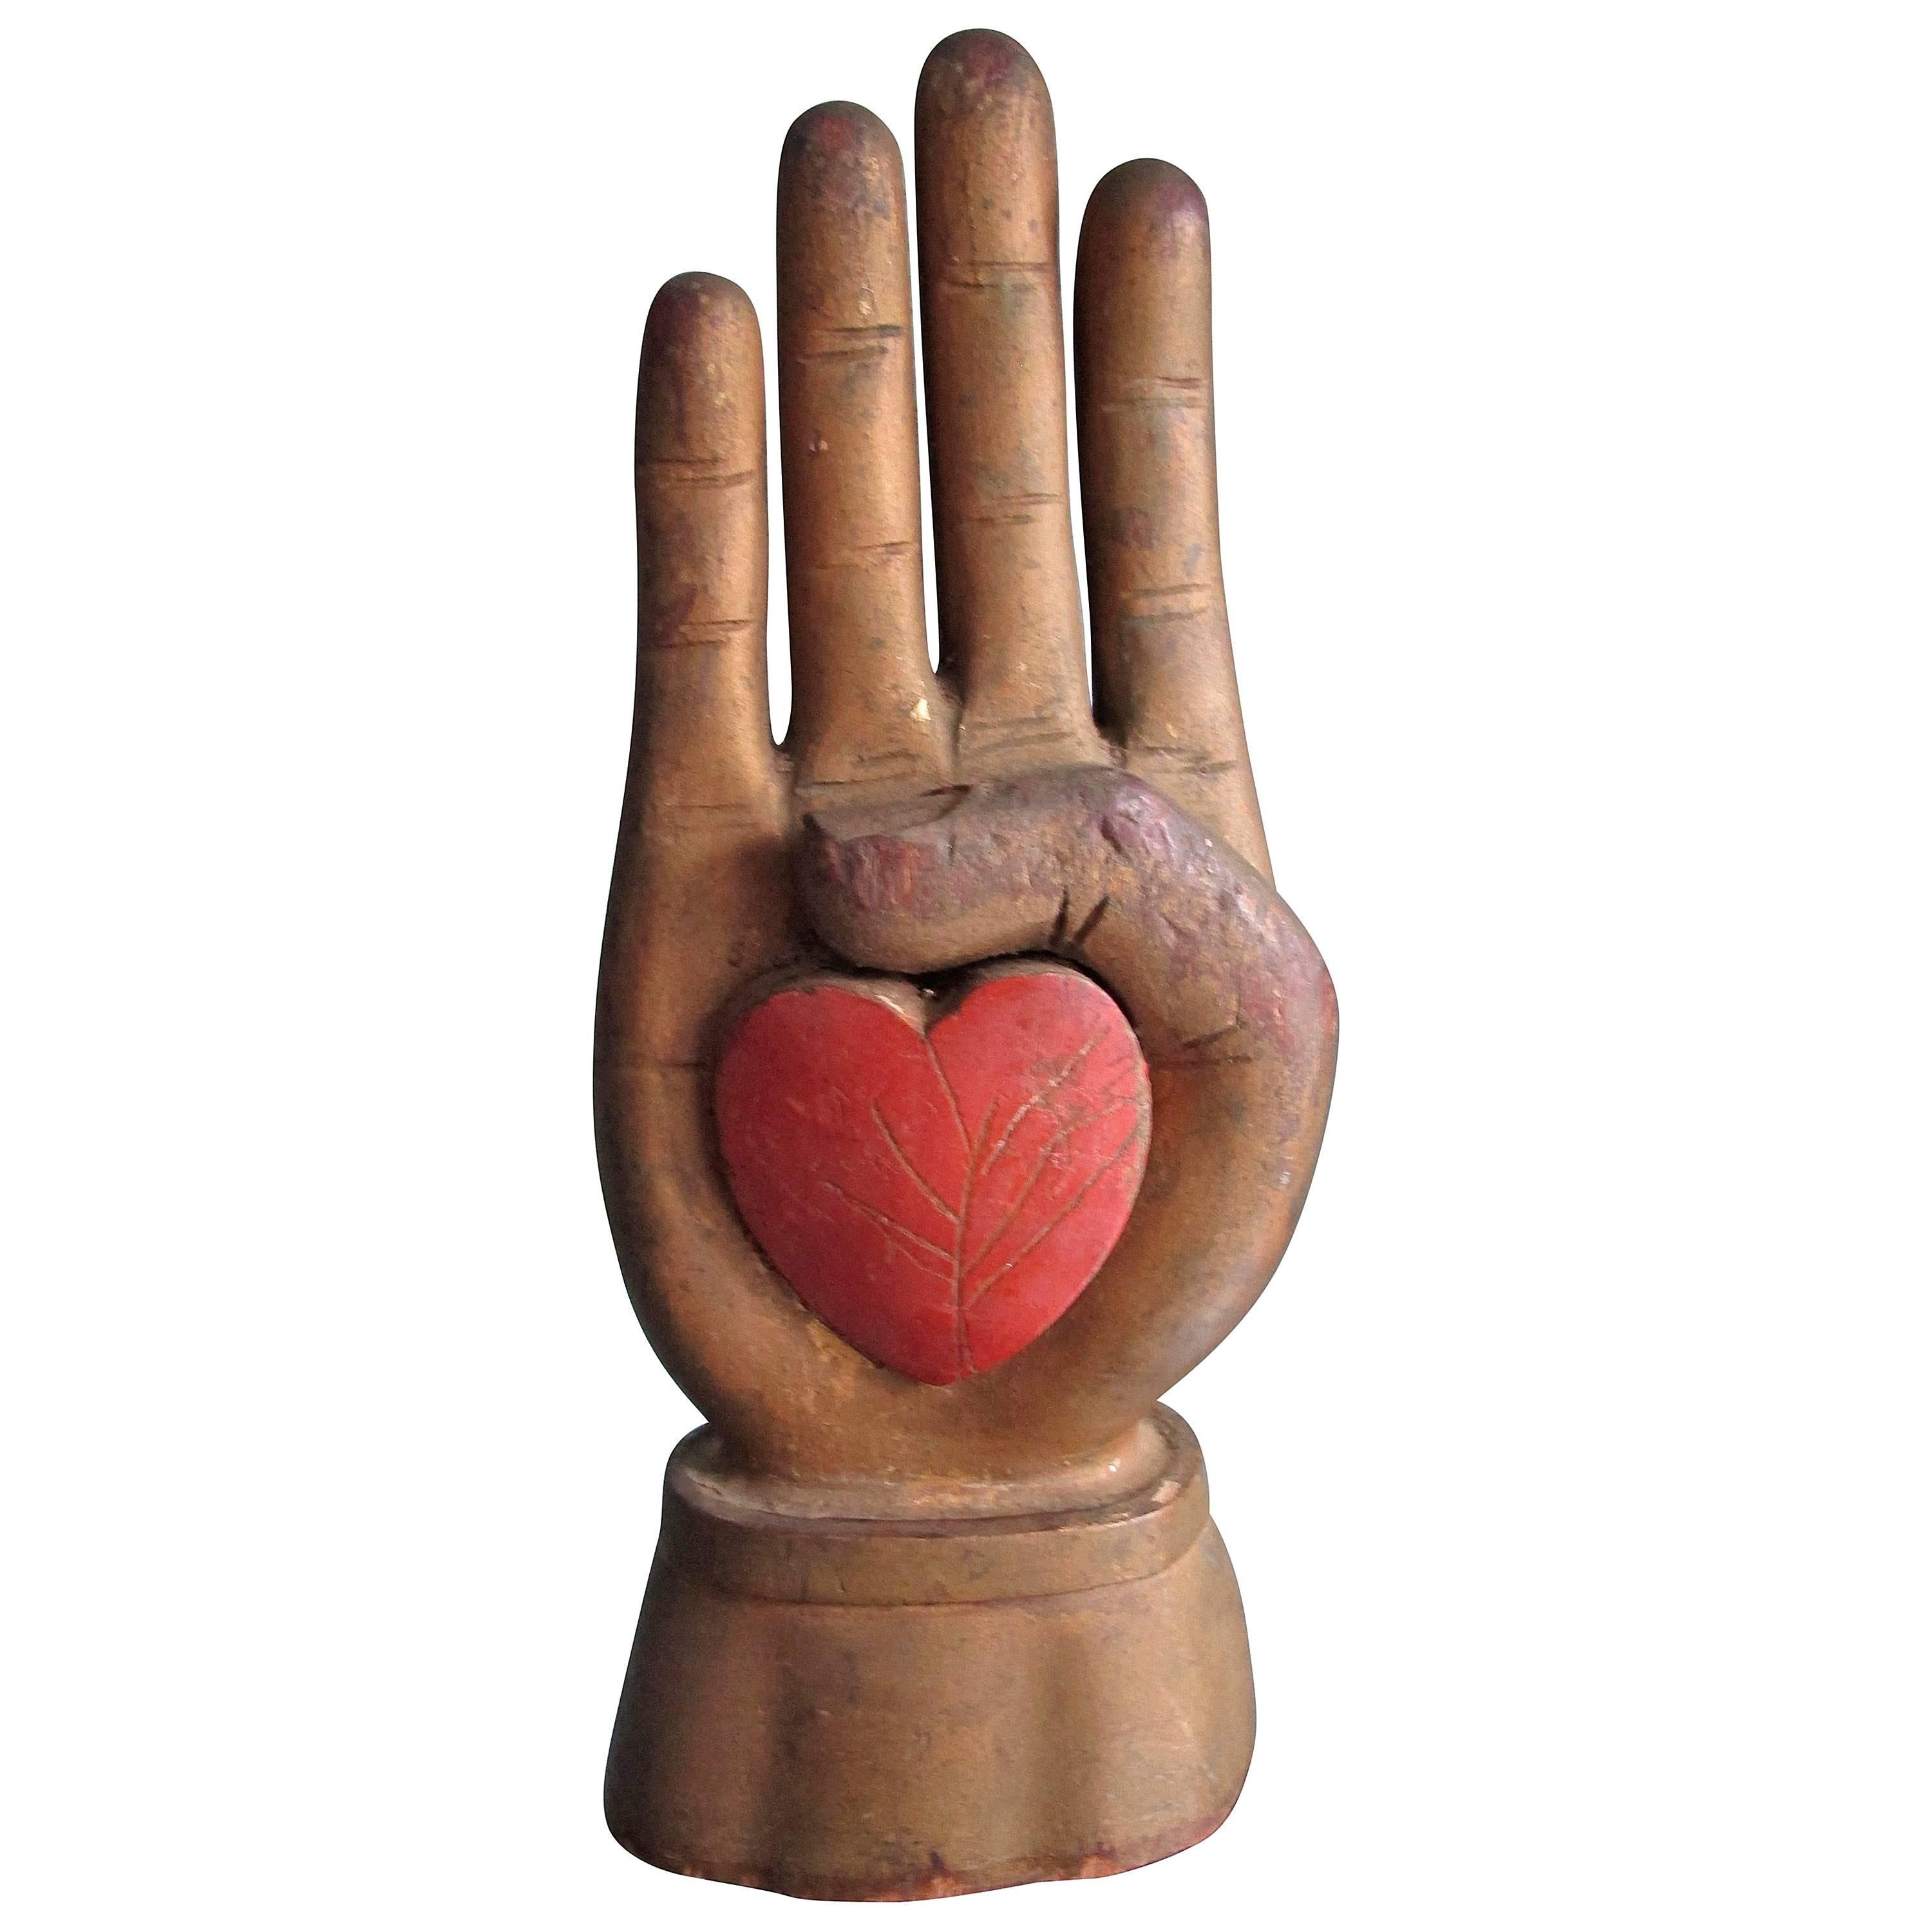 Heart in Hand Carving from an Odd Fellows Fraternal Lodge For Sale